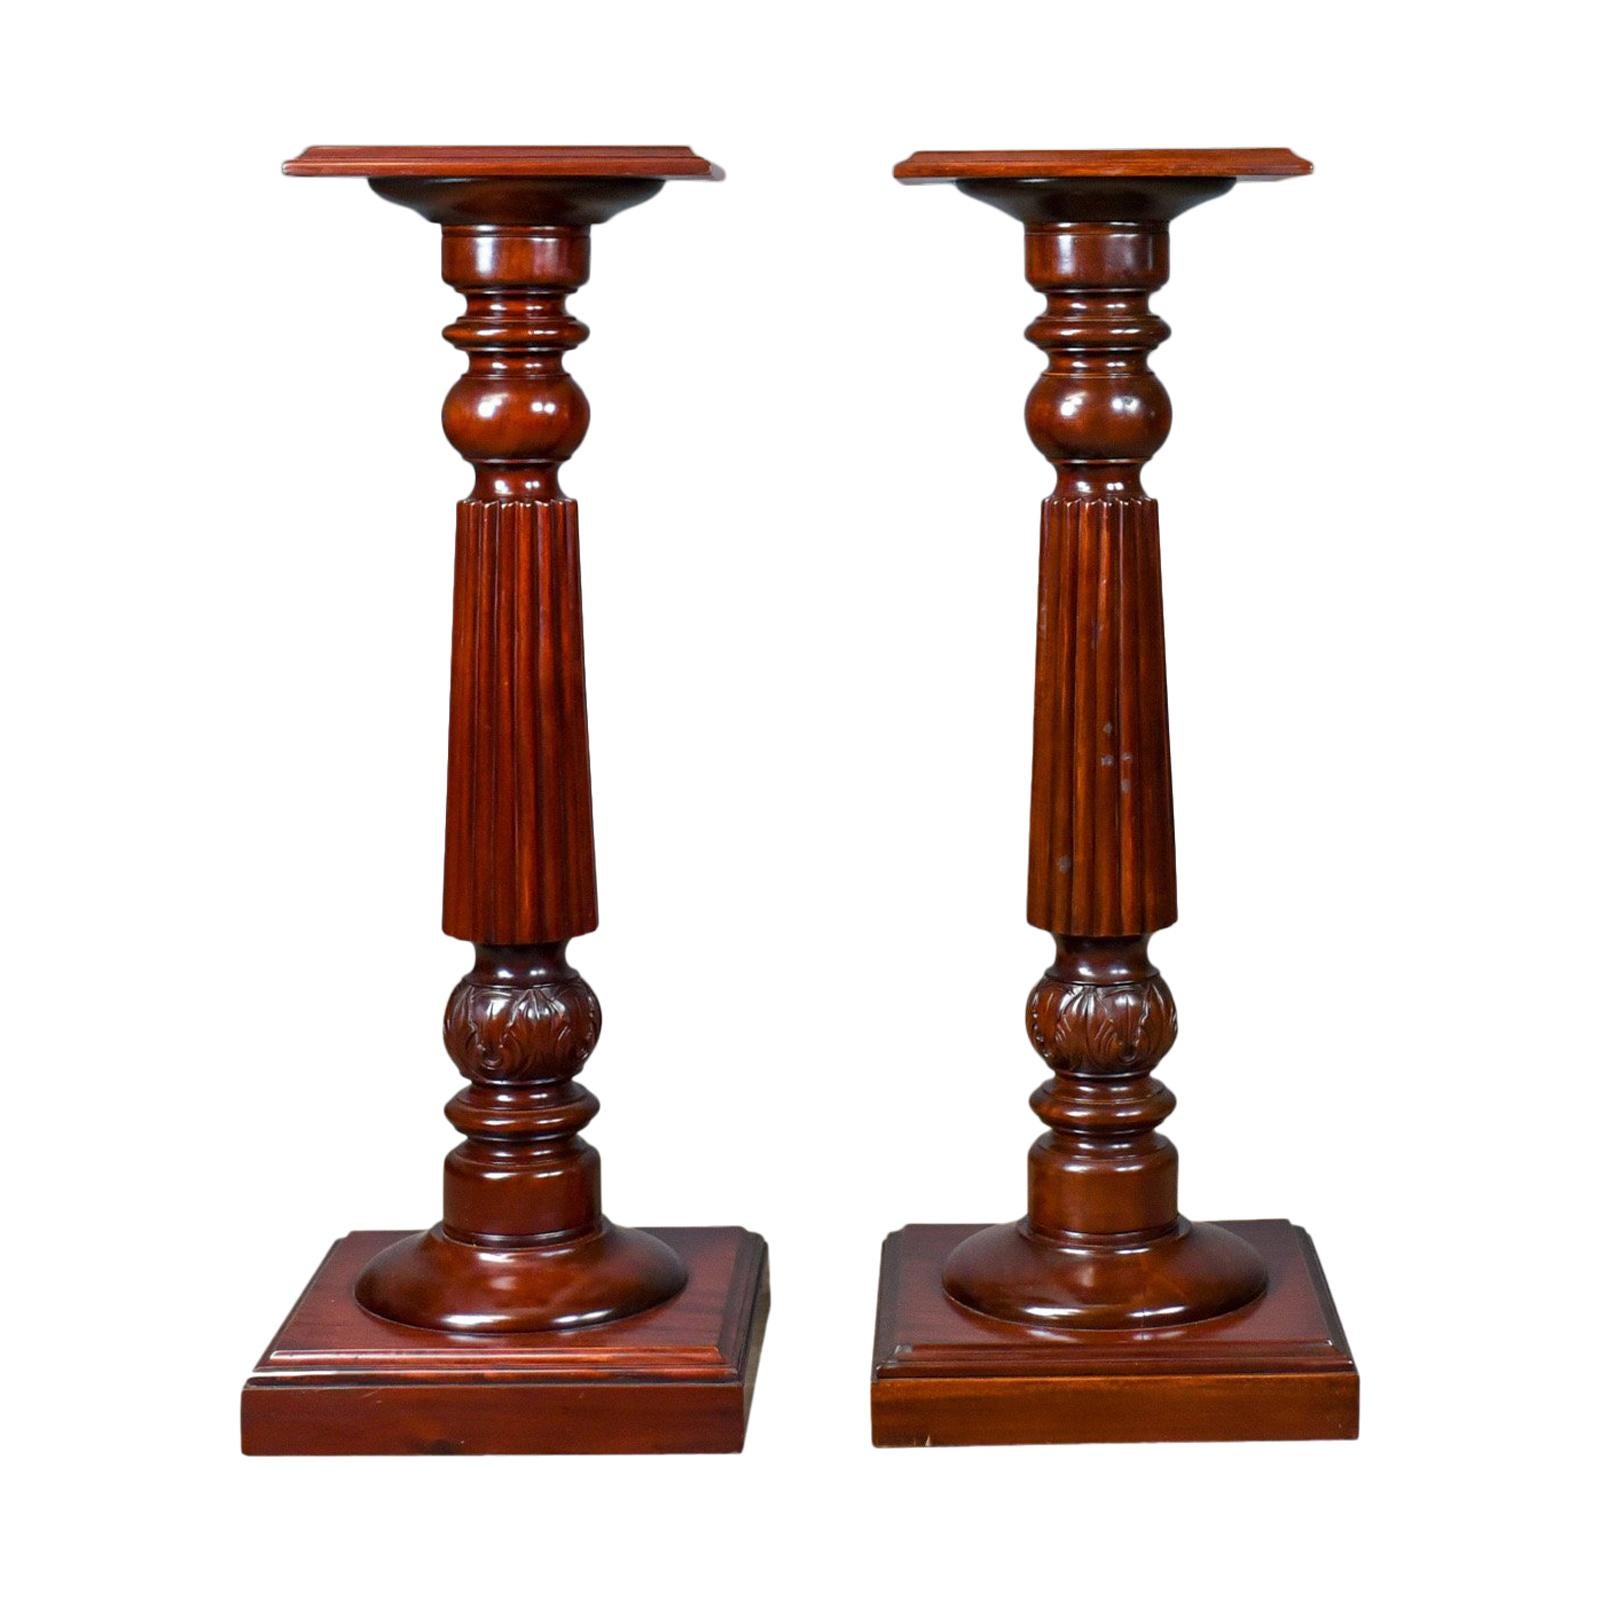 This is a pair of vintage torcheres in the Victorian taste, mahogany pedestal plant stand columns dating to the late 20th century.

Attractive color and graining to the solid mahogany
Of quality craftsmanship with a lustrous polished